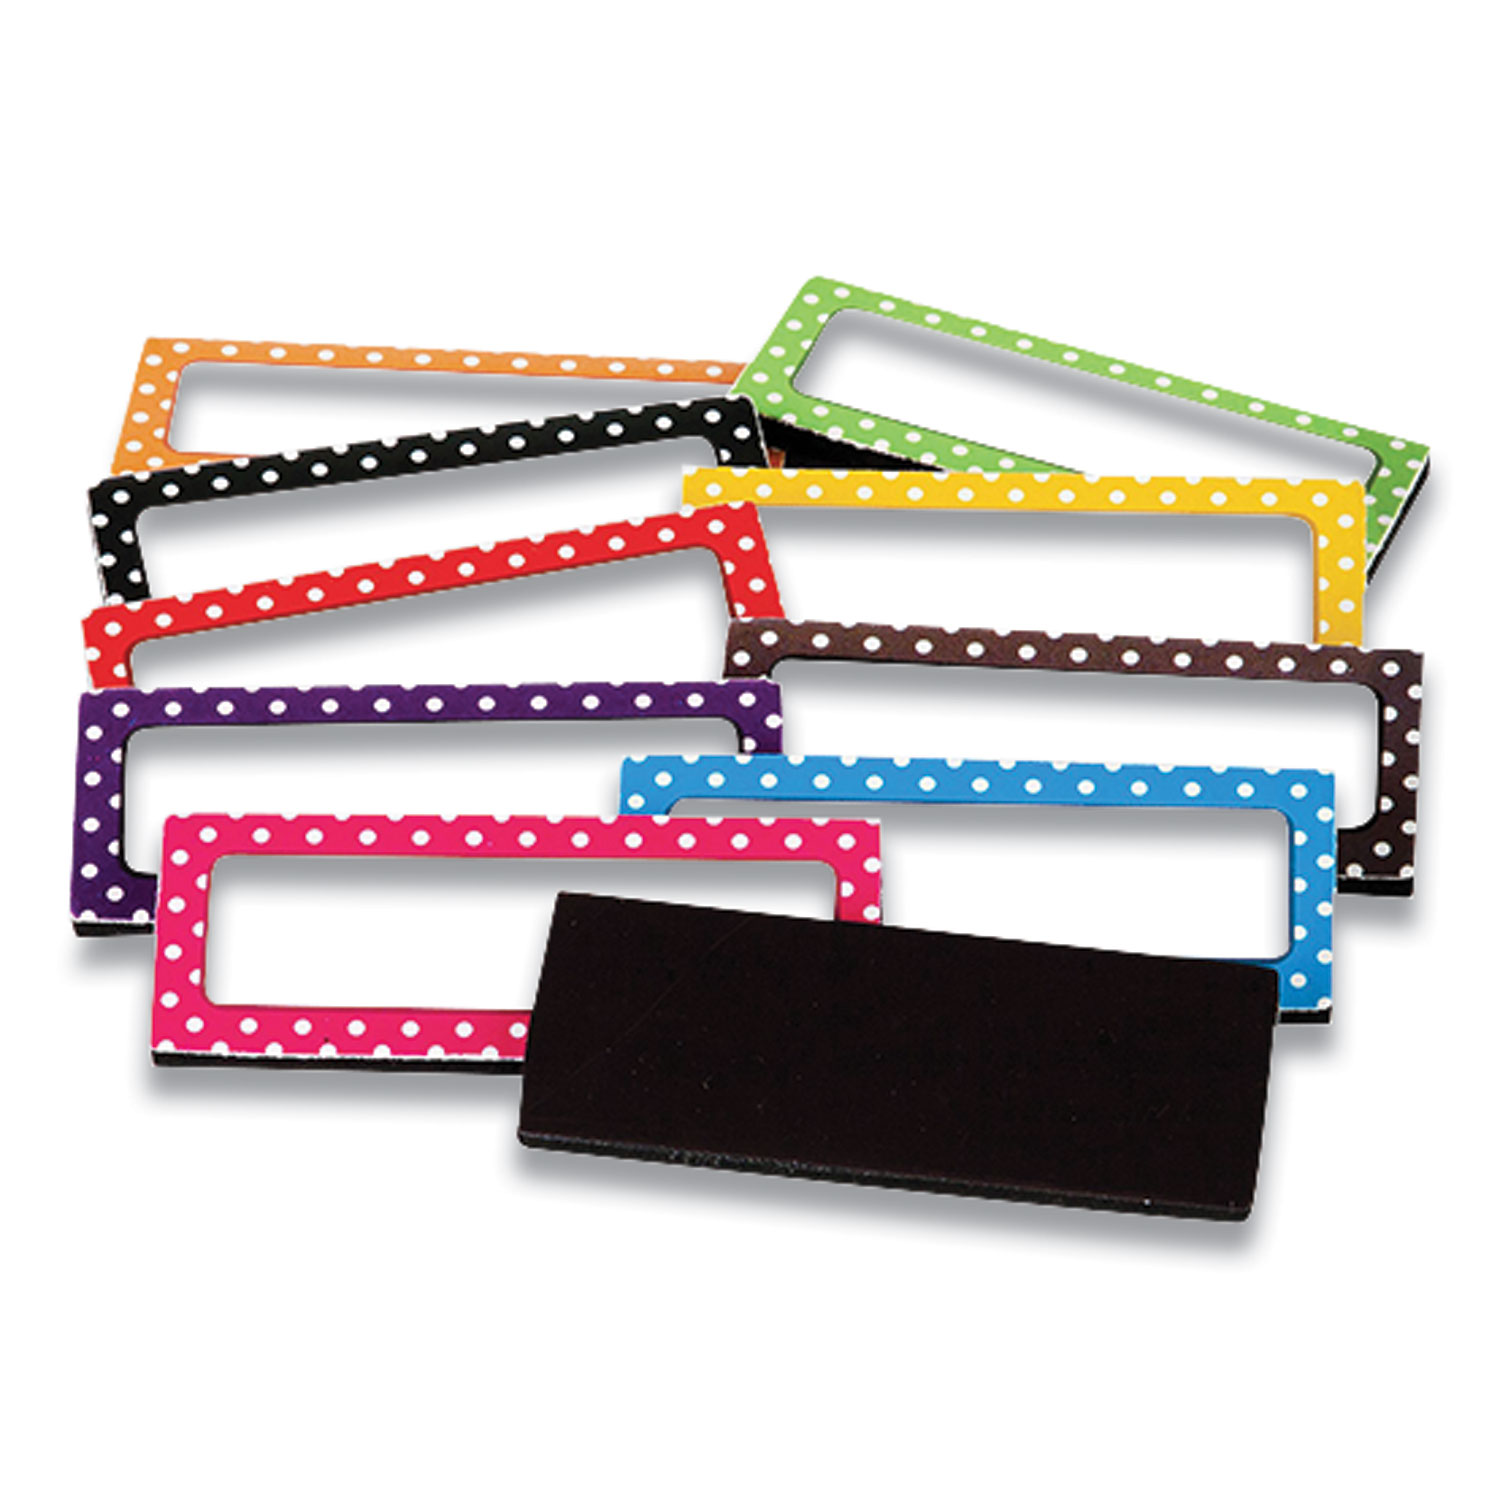  Teacher Created Resources TCR20650 Magnetic Label Set, Polka Dots, 2.5 x 1, 30/Pack (TCR1609951) 